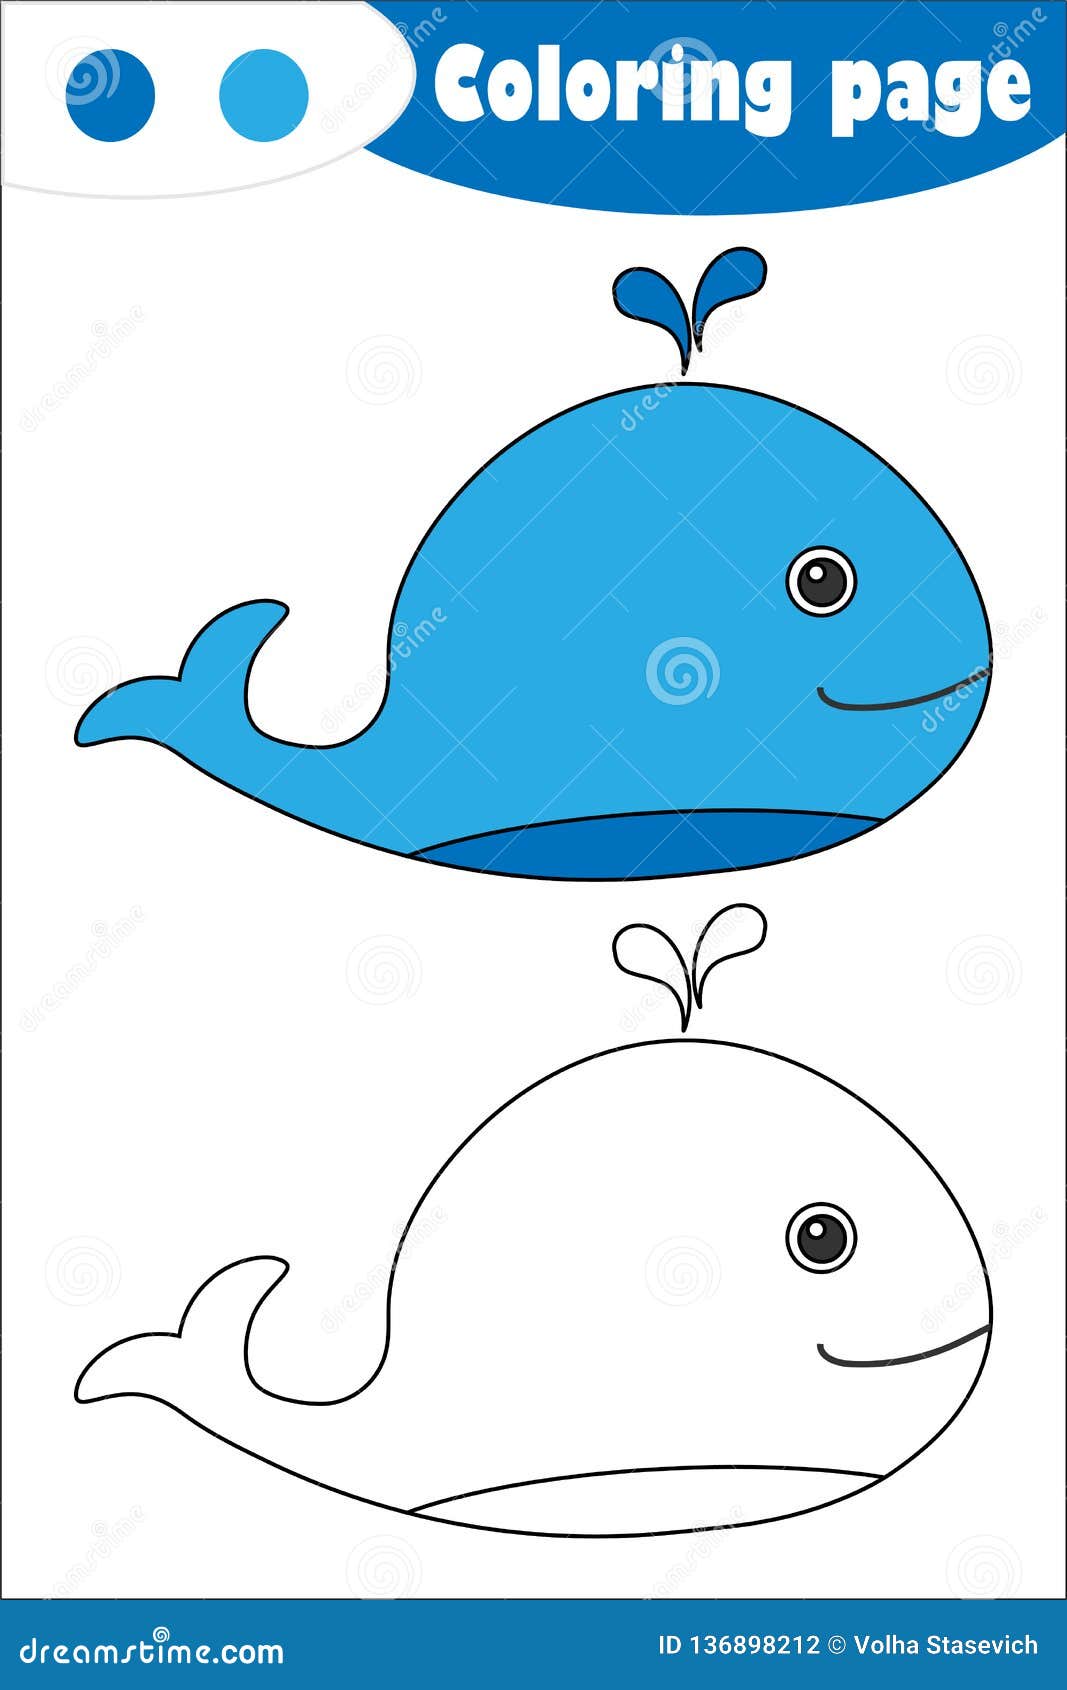 Whale in cartoon style coloring page education paper game for the development of children kids preschool activity printable stock illustration